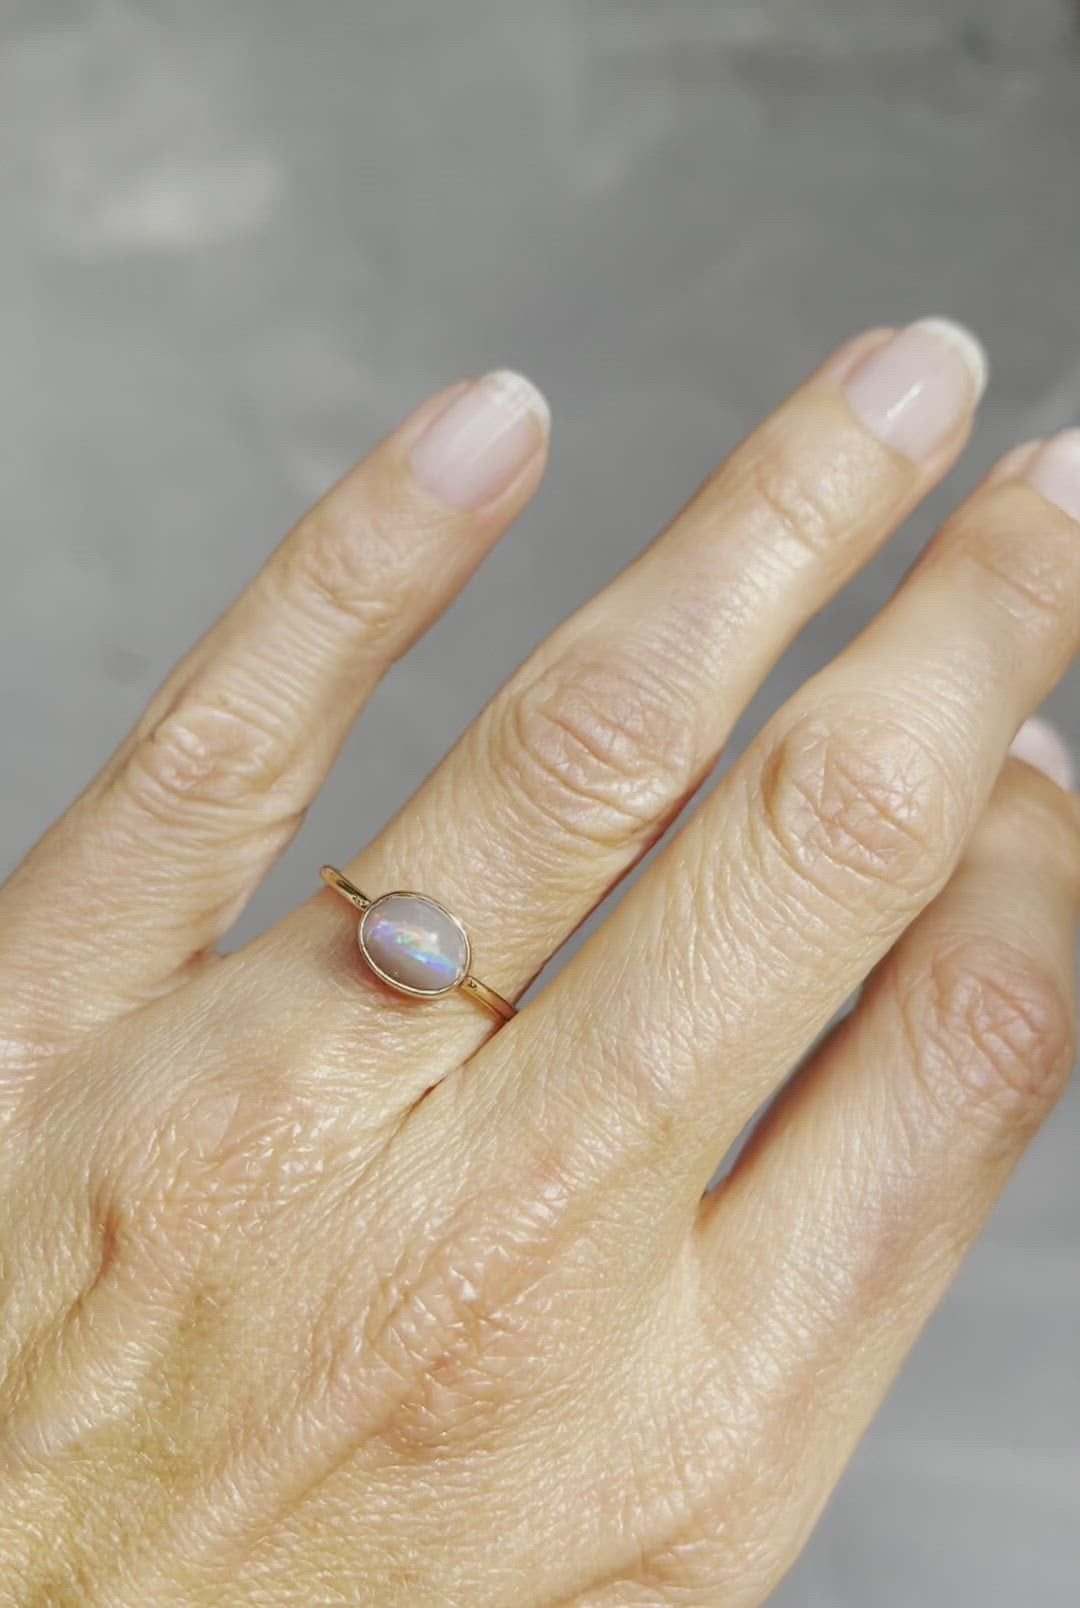 Video of rainbow opal ring by NIXIN Jewelry